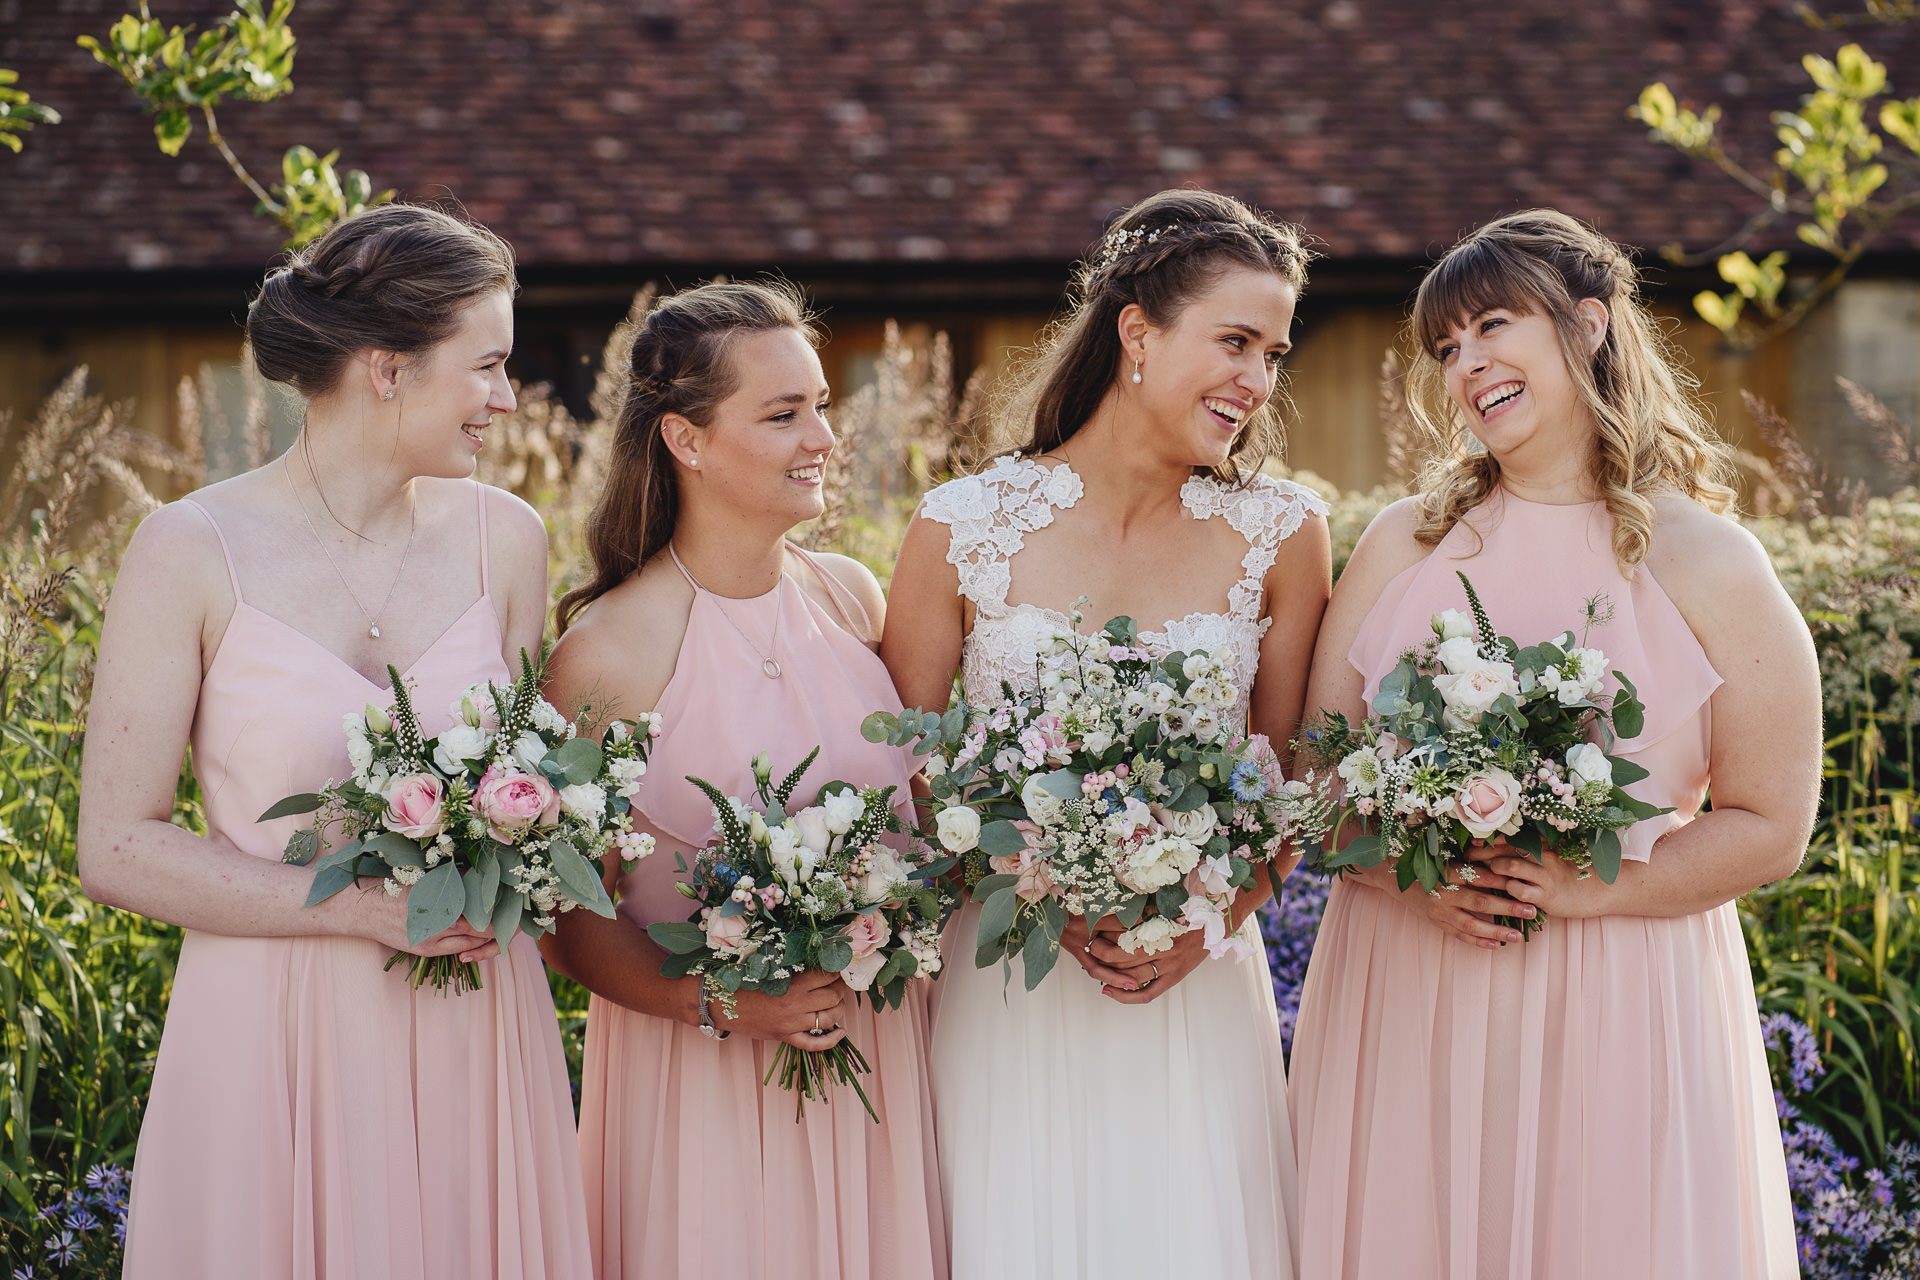 Relaxed group photo of bride and bridesmaids